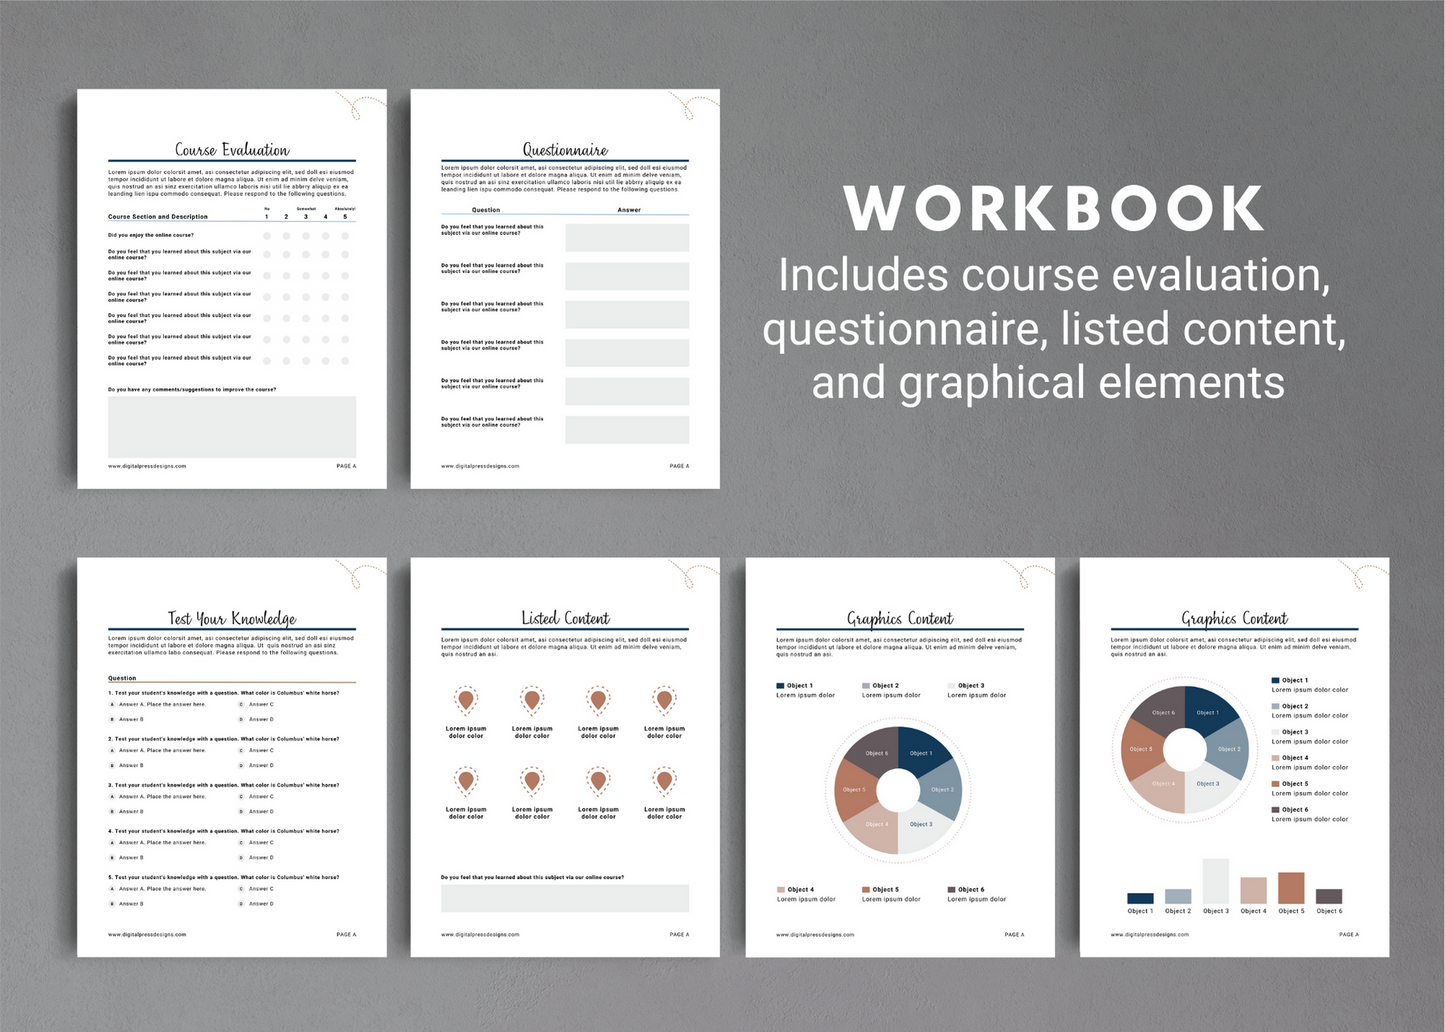 Ebook and Workbook, Lead Magnet, and Magazine Canva Template